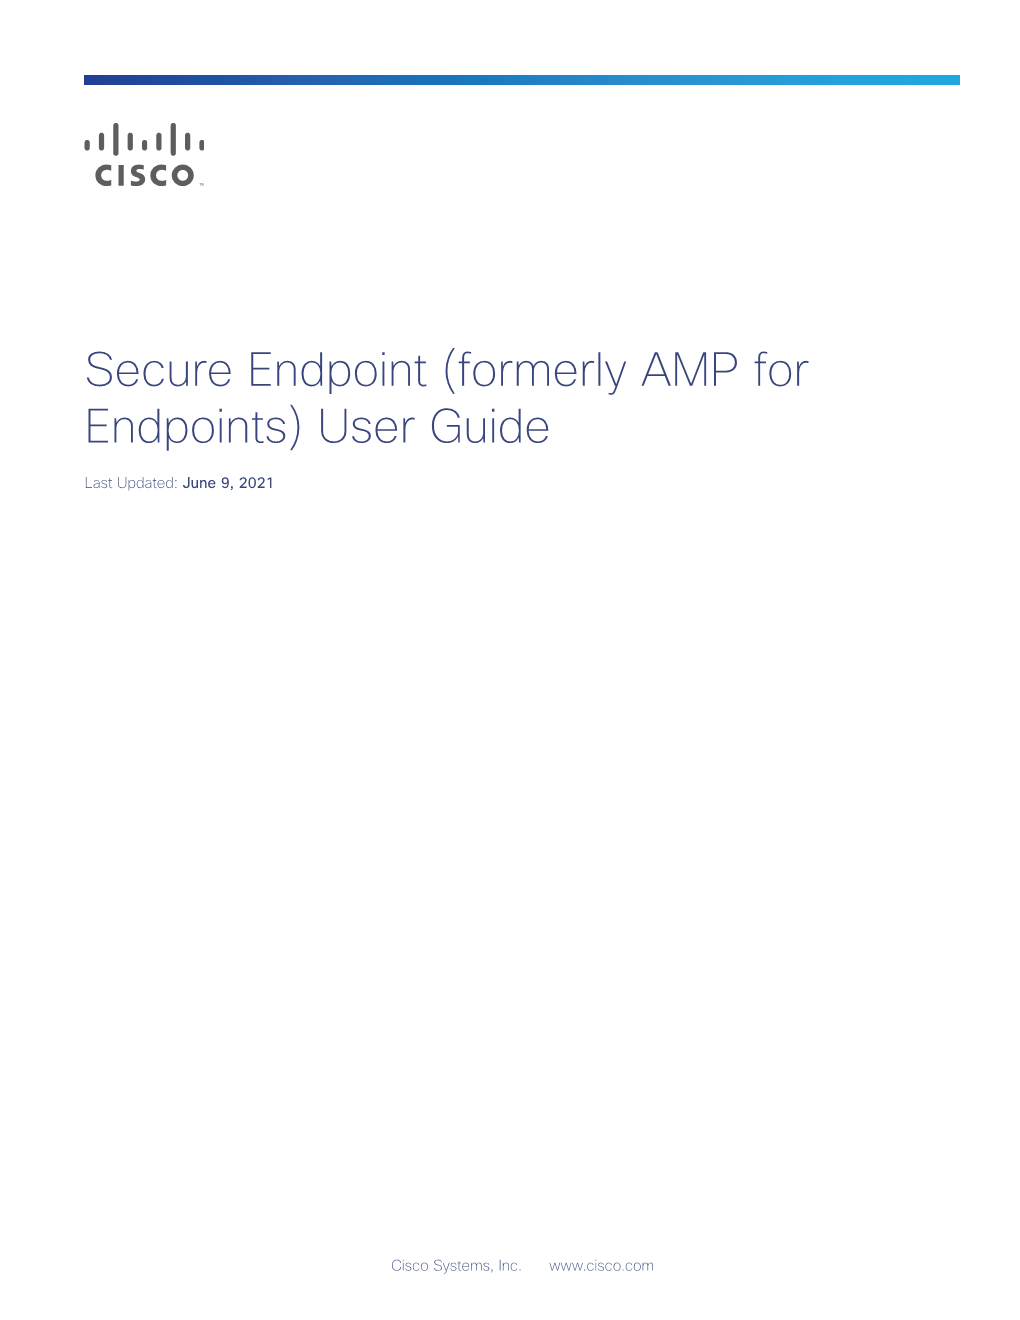 Secure Endpoint Quick Start.Book